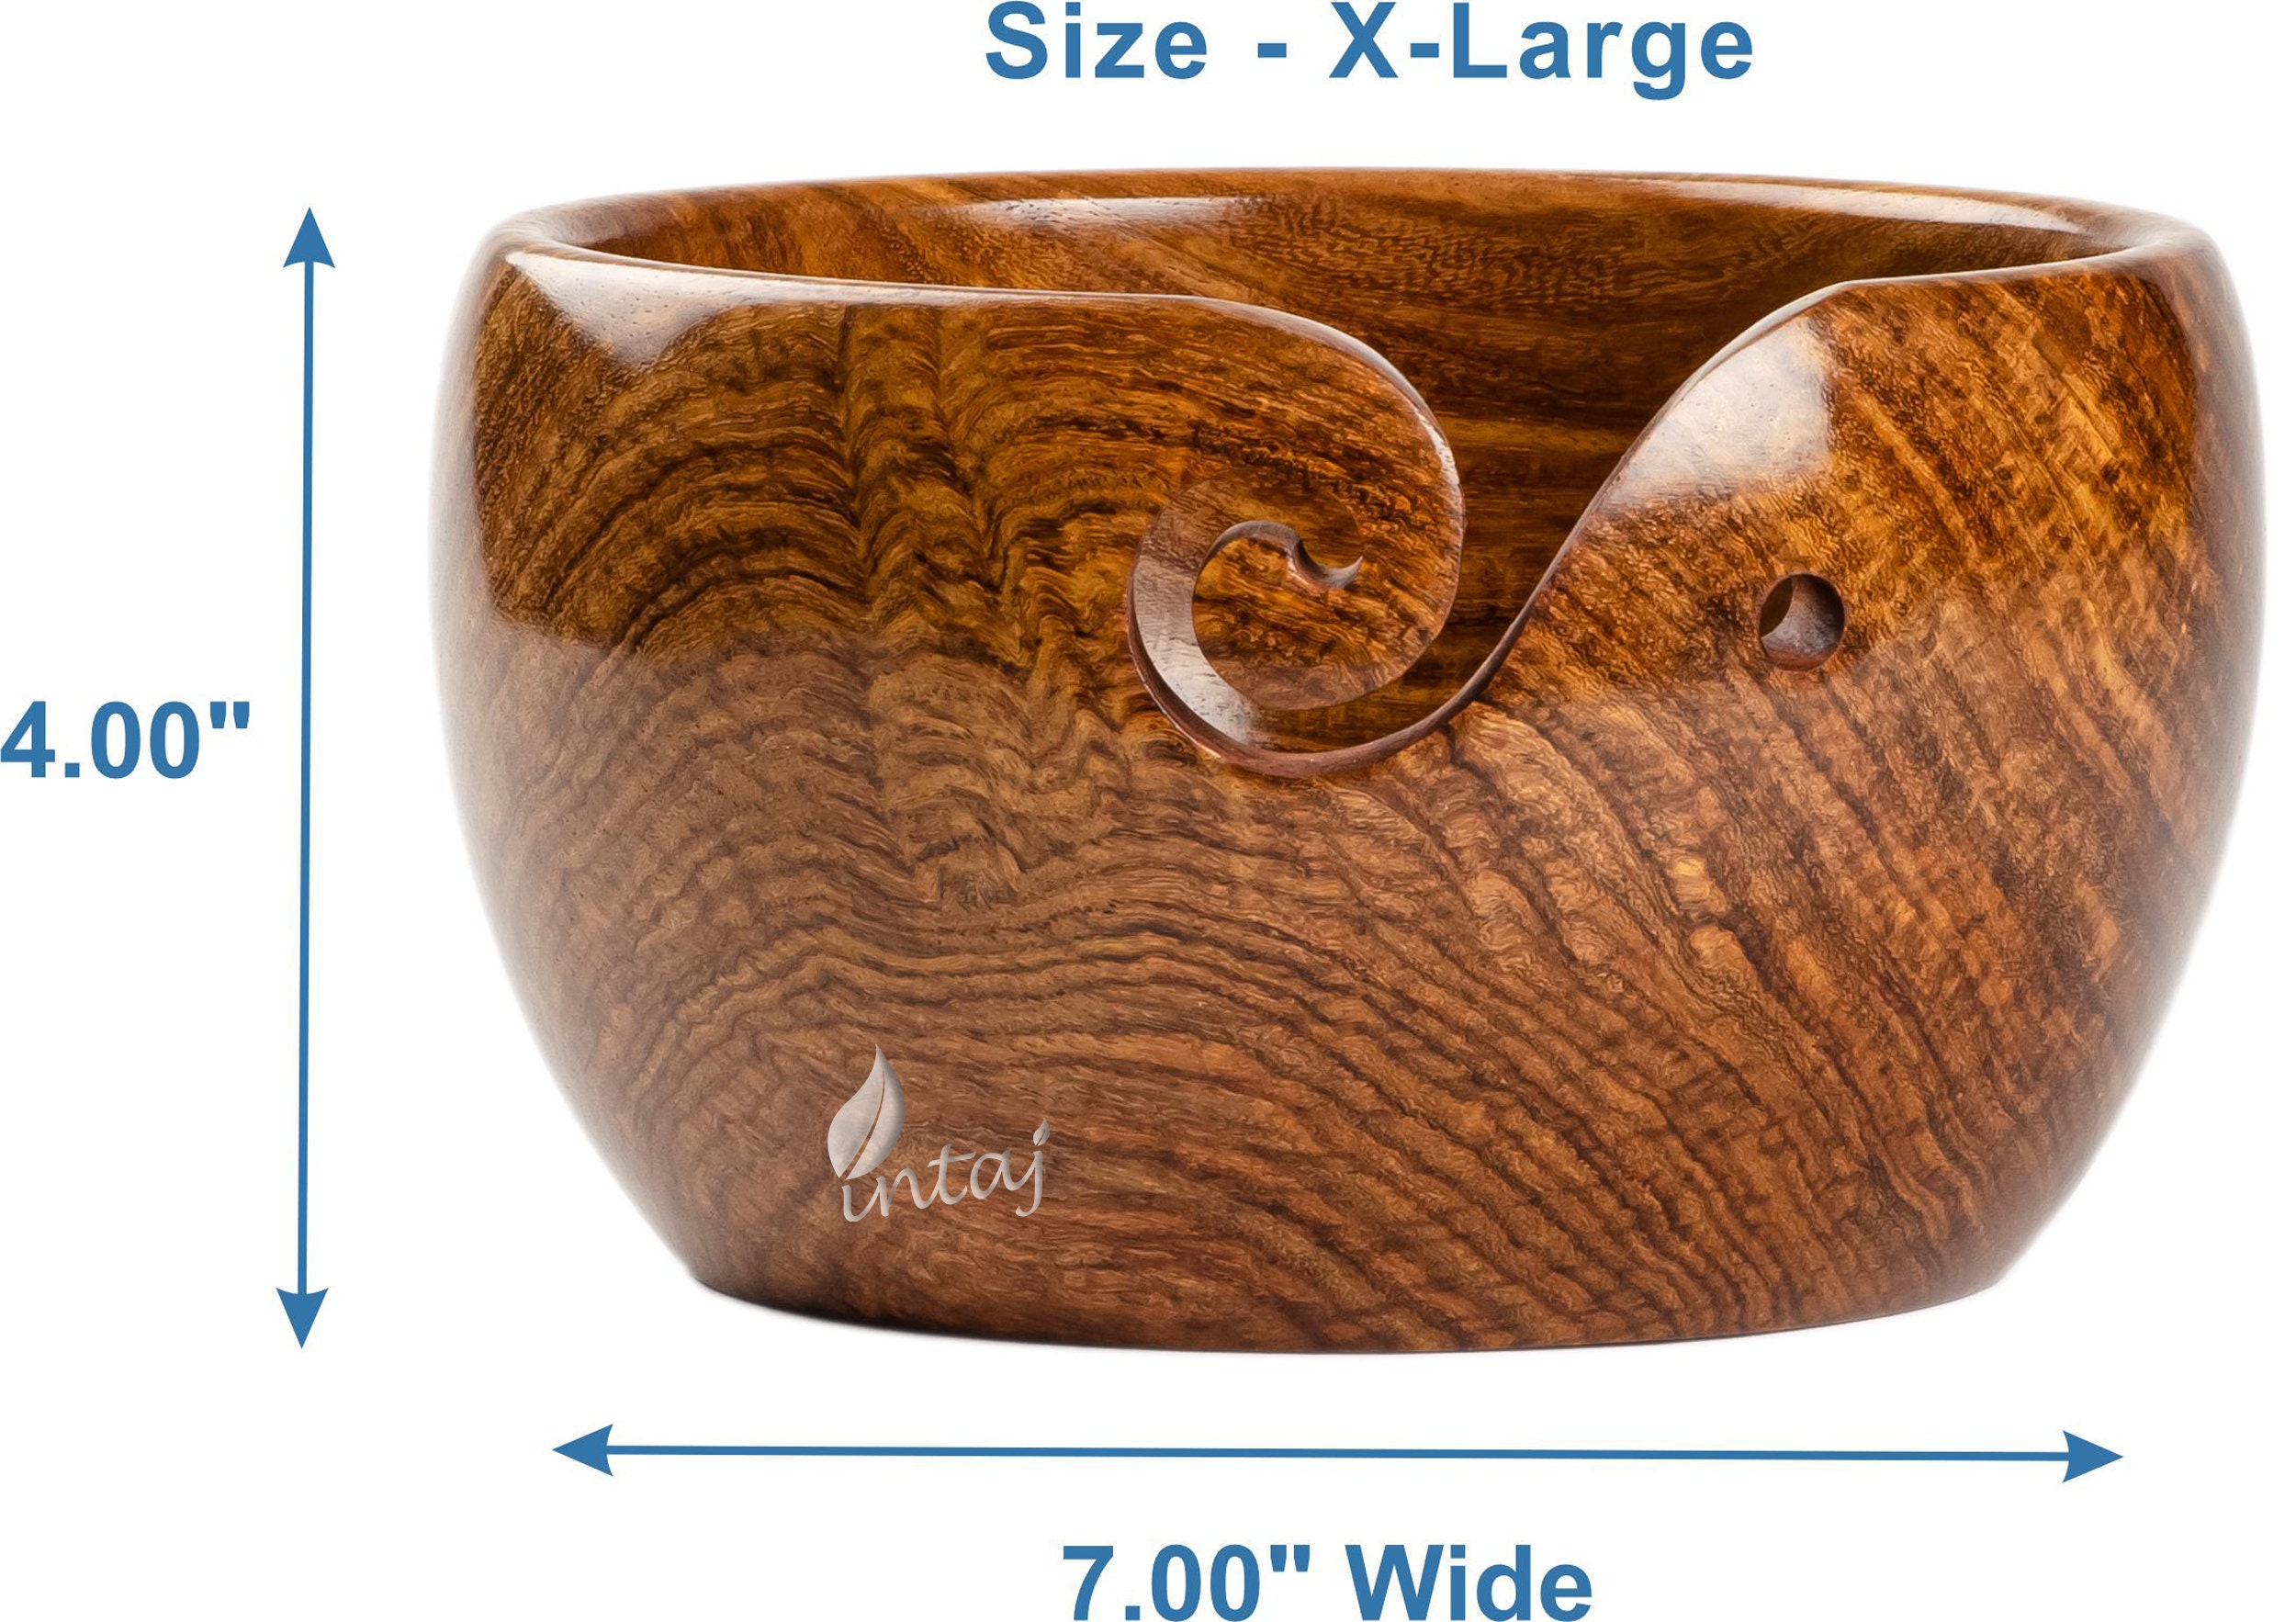 Glory to Glory Large Yarn Bowl | 5 in x 7 in Yarn Bowls for Crocheting Large | Unique Design Crochet Bowl | Pine Wood Crochet Bowls for Yarn | Yarn Holder for